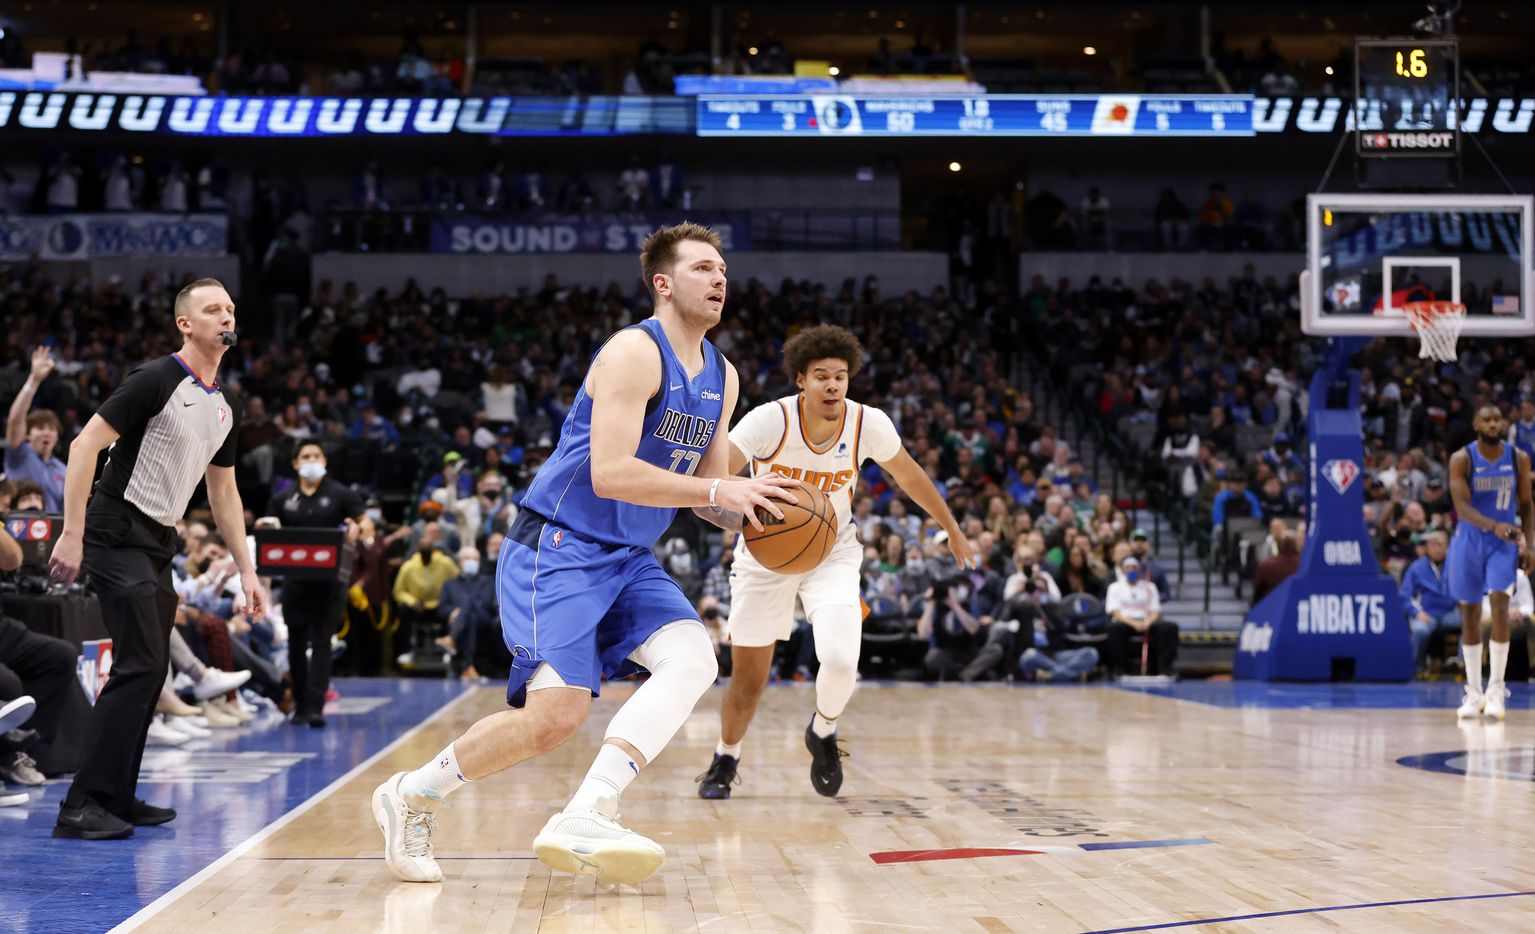 After making a steal, Dallas Mavericks guard Luka Doncic (77) quickly dribbled up court and...